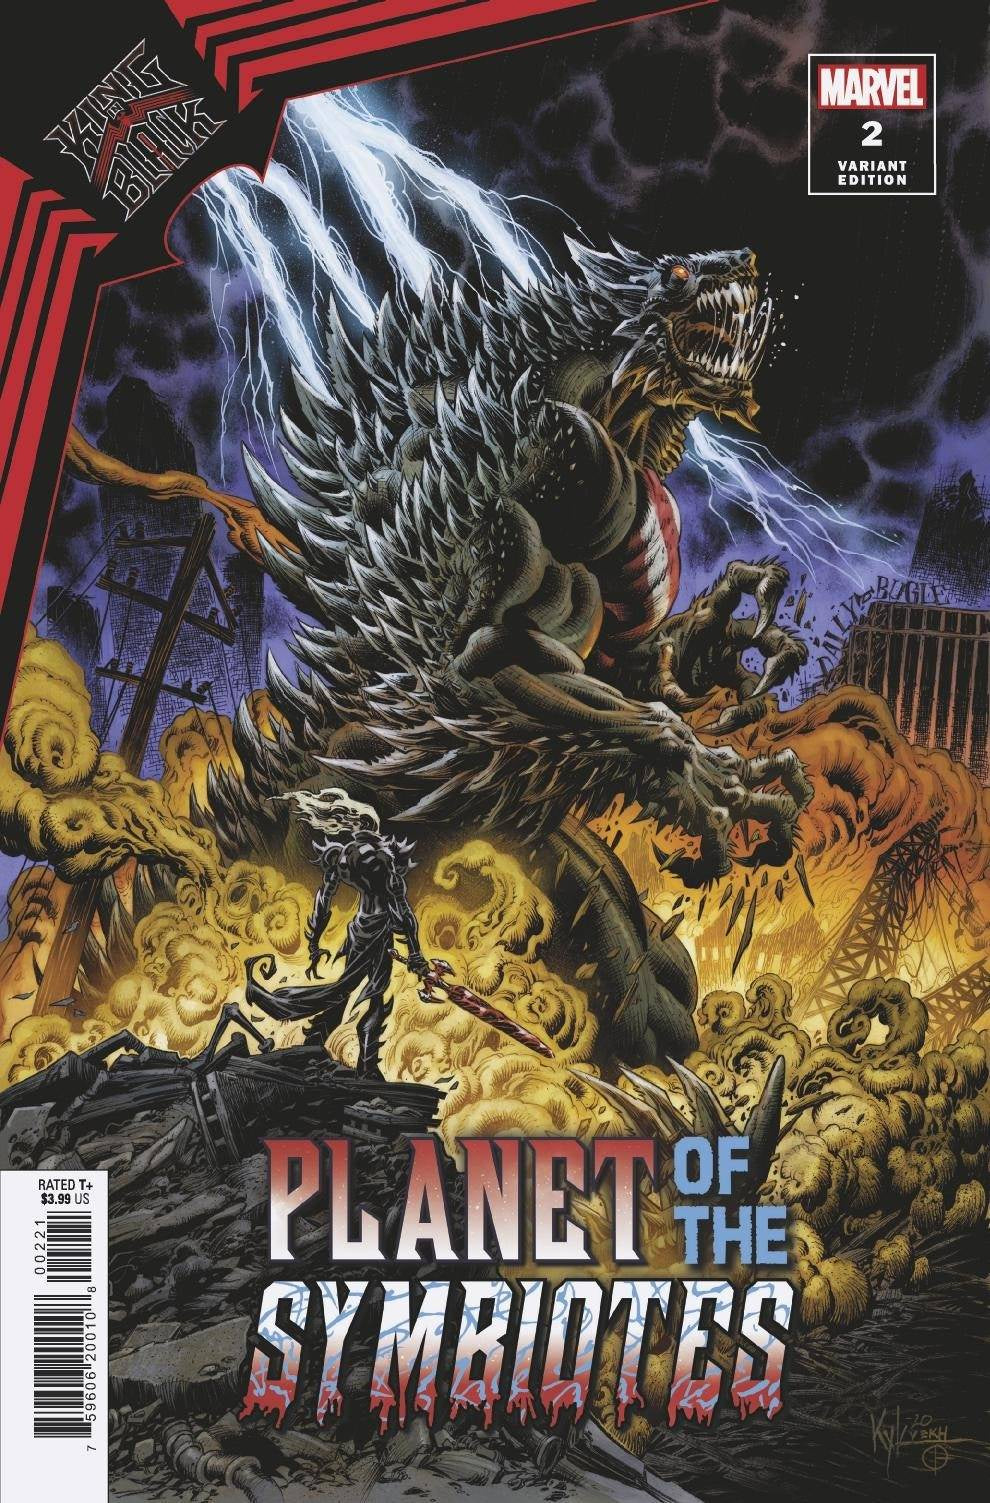 KING IN BLACK PLANET OF SYMBIOTES #2 (OF 3) HOTZ VARIANT